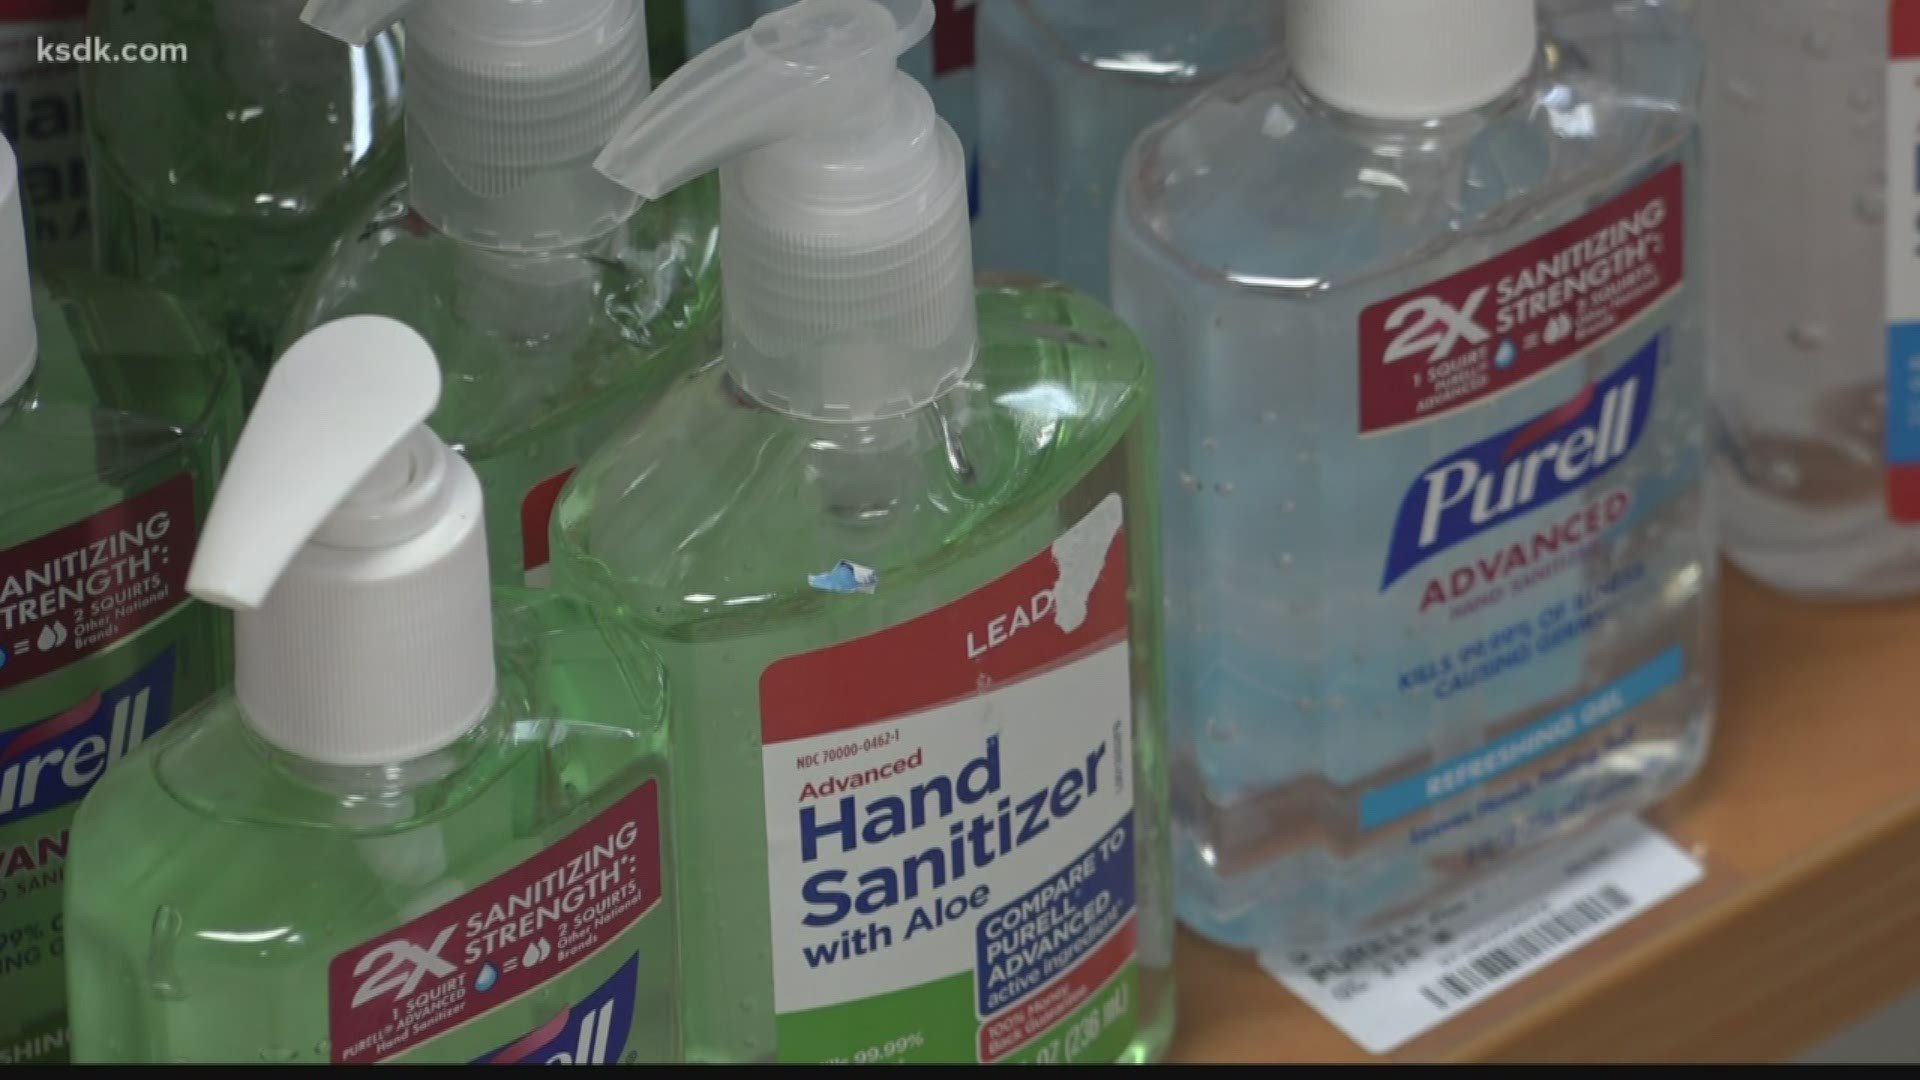 Several St. Louis-area stores are running out of sanitizer and one big box store is restricting some sales.